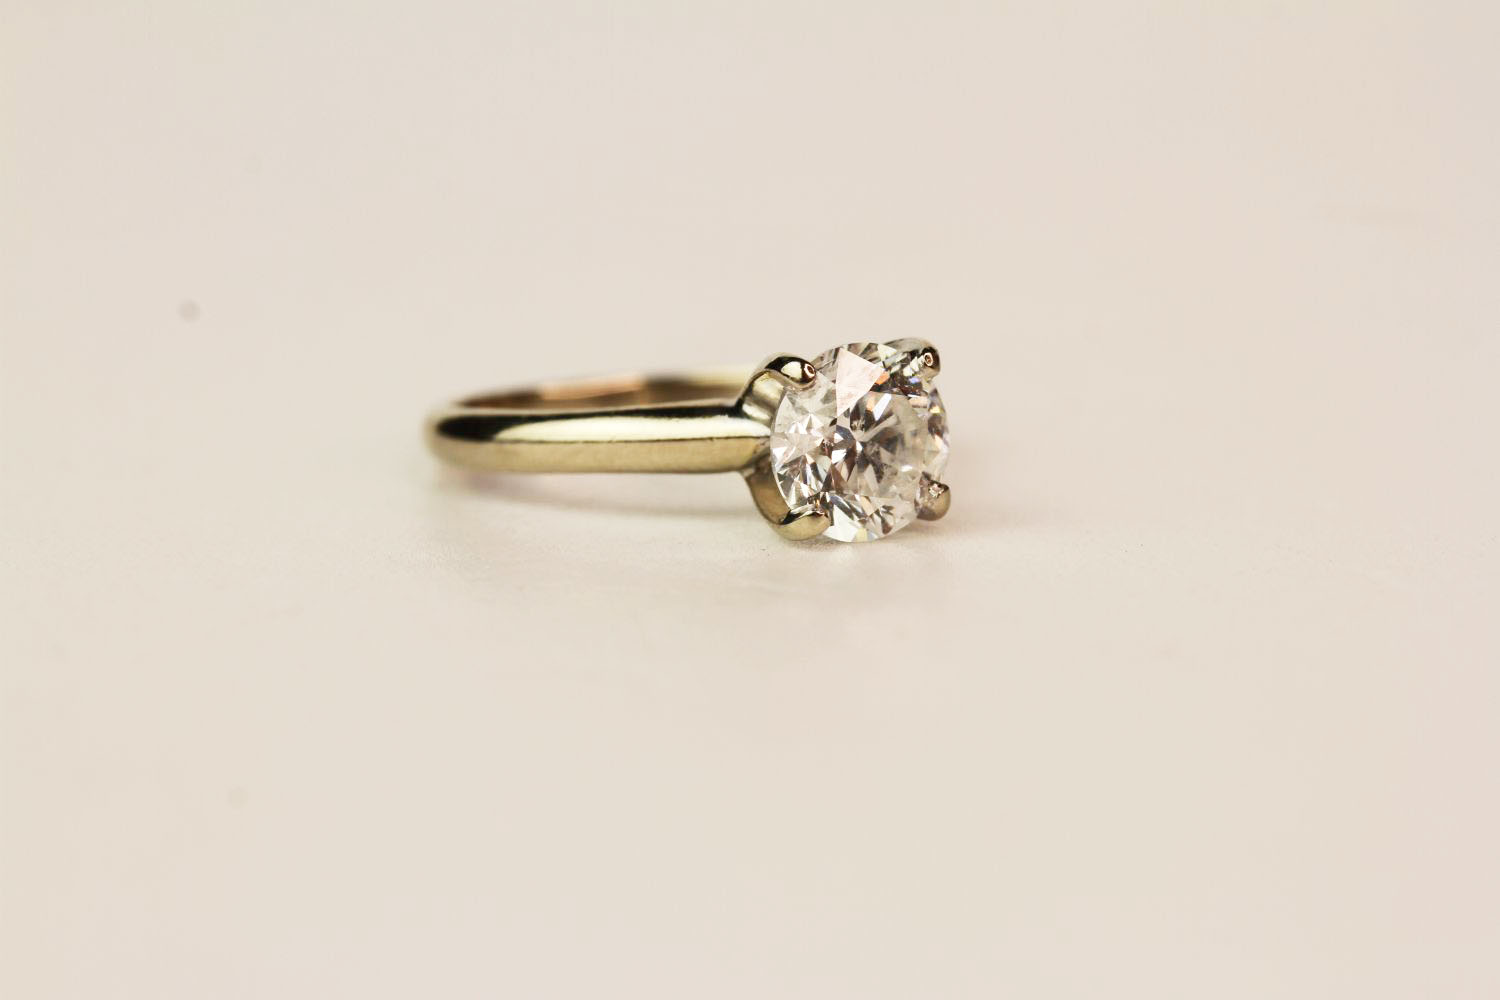 Solitaire Diamond Ring, set with 1 round brilliant cut diamond, 4 claw set, 14ct white gold band, - Image 2 of 4